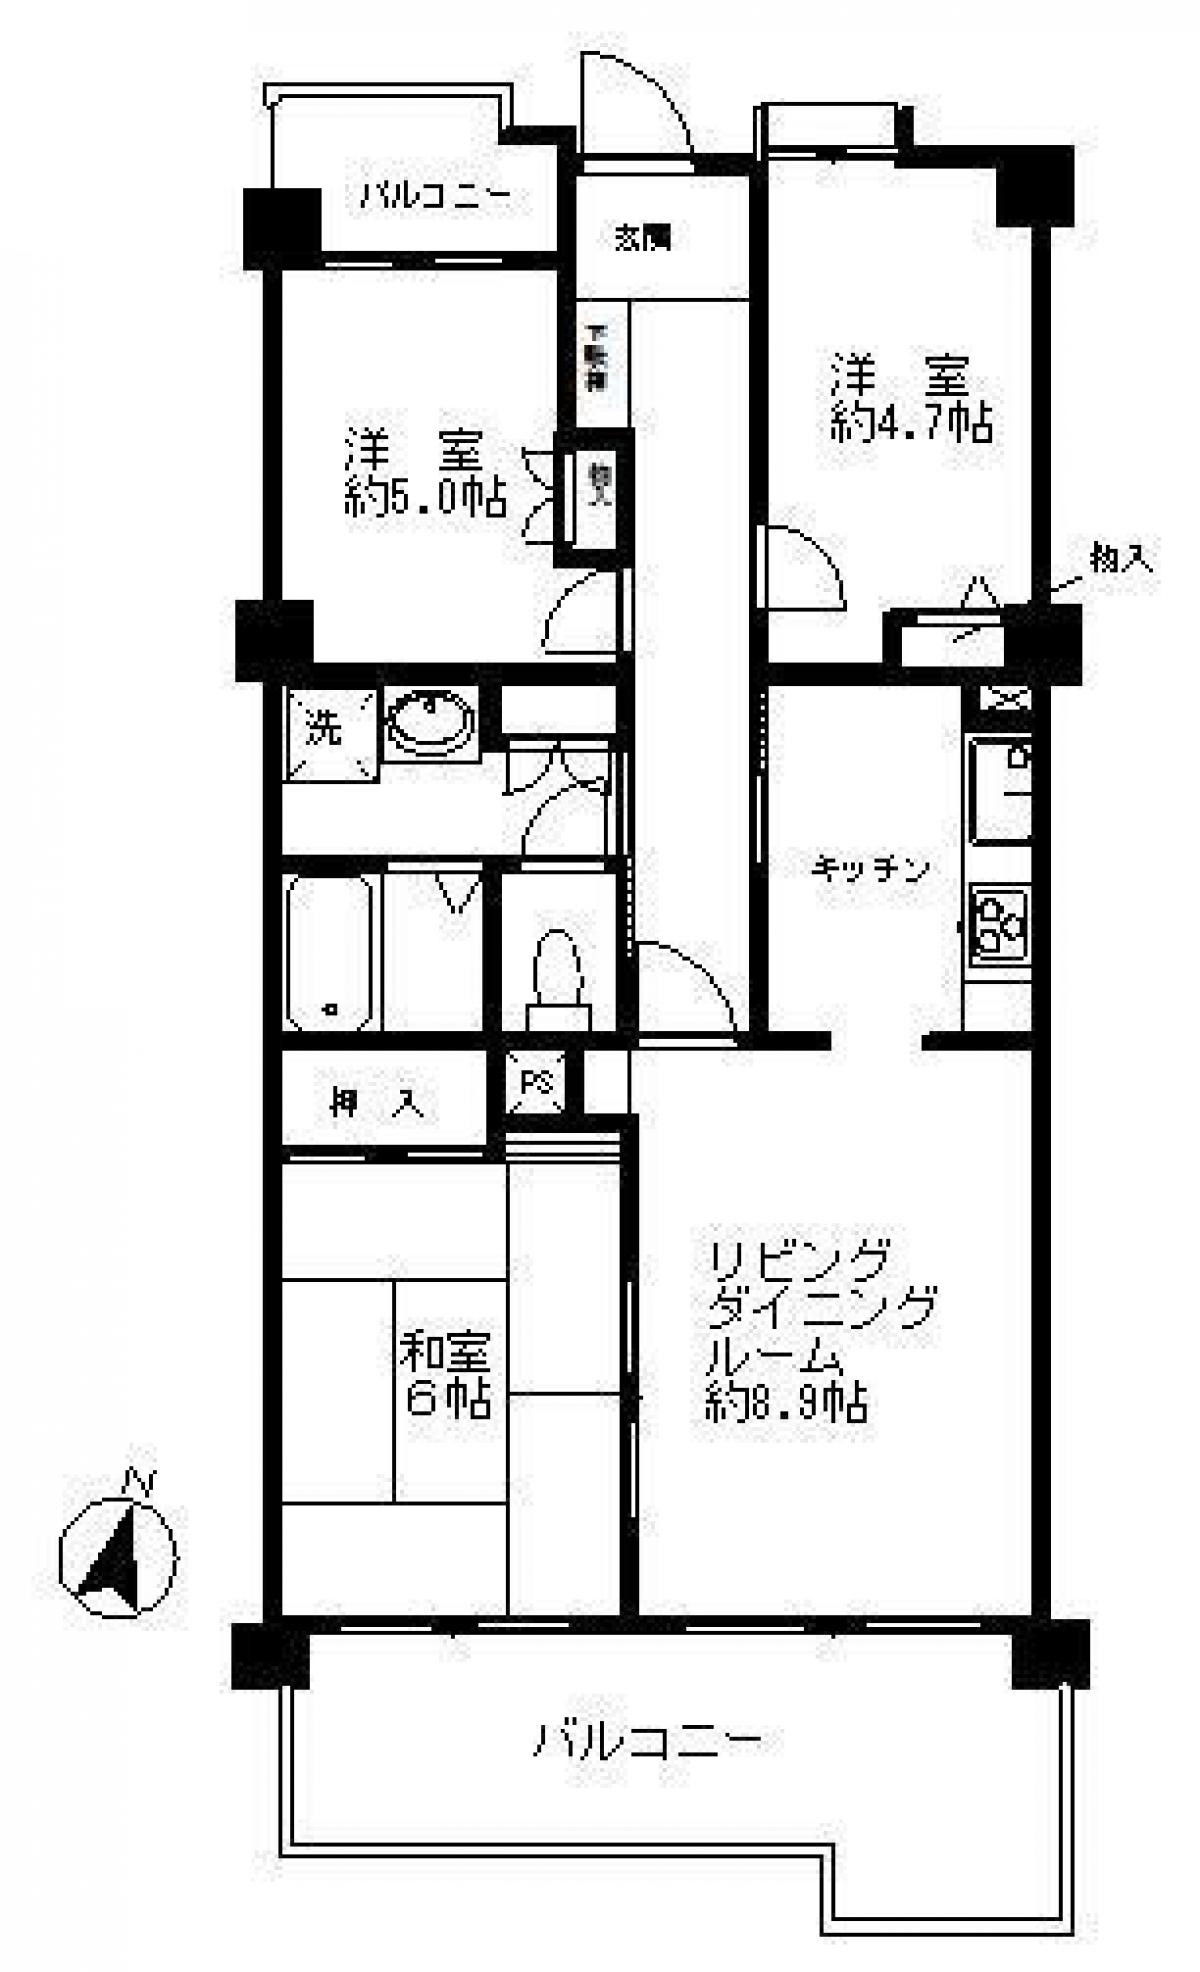 Picture of Apartment For Sale in Chigasaki Shi, Kanagawa, Japan